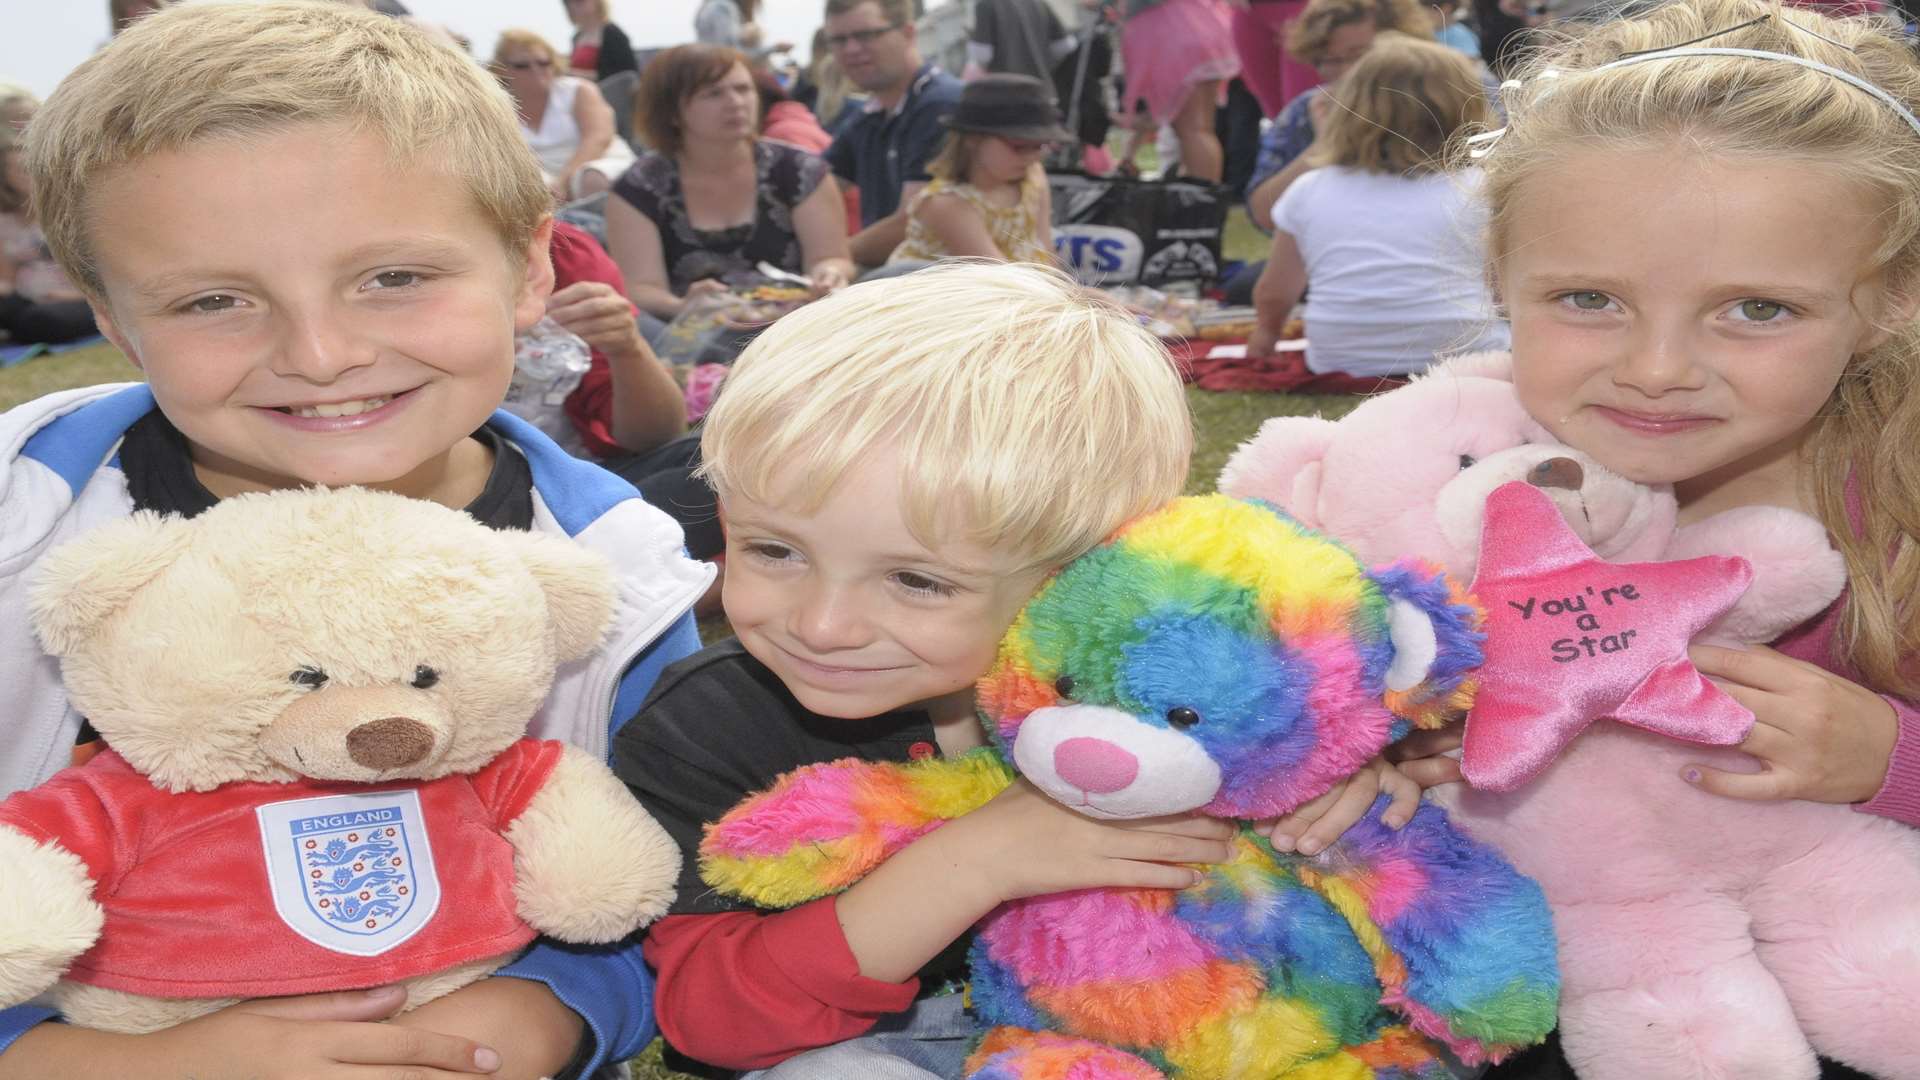 Deal Regatta Week starts with the Teddy Bear's Picnic on Walmer Green today